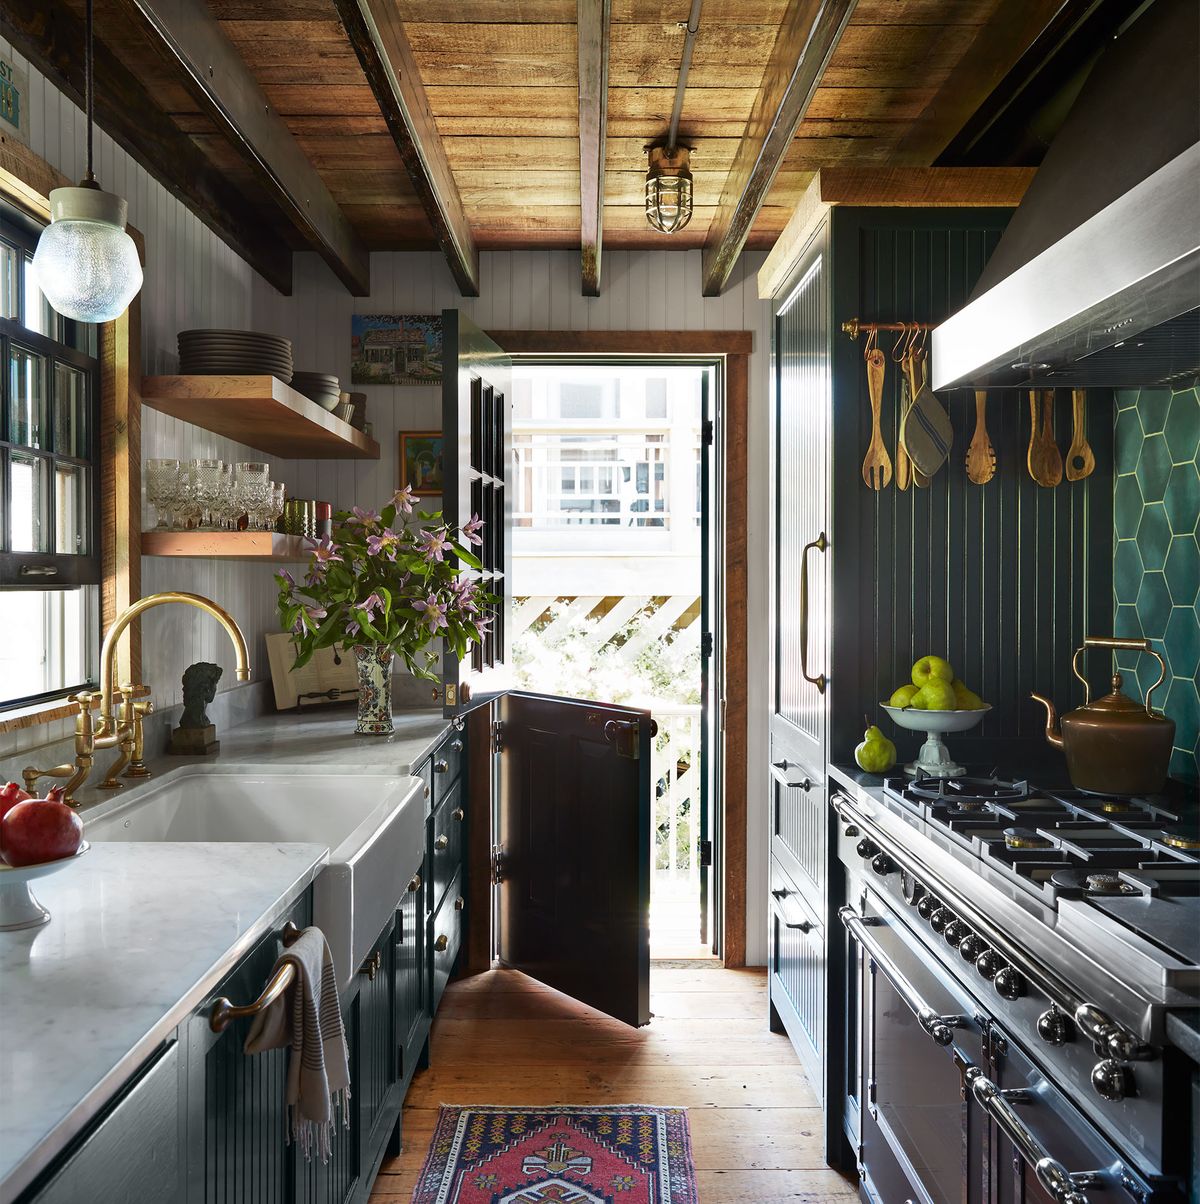 a galley kitchen has cabinets topped with a white marble counter, sink with a glass pendant above, open shelves, an open dutch door, bead board cabinets, stove and oven with tools hanging above, green tiled backsplash